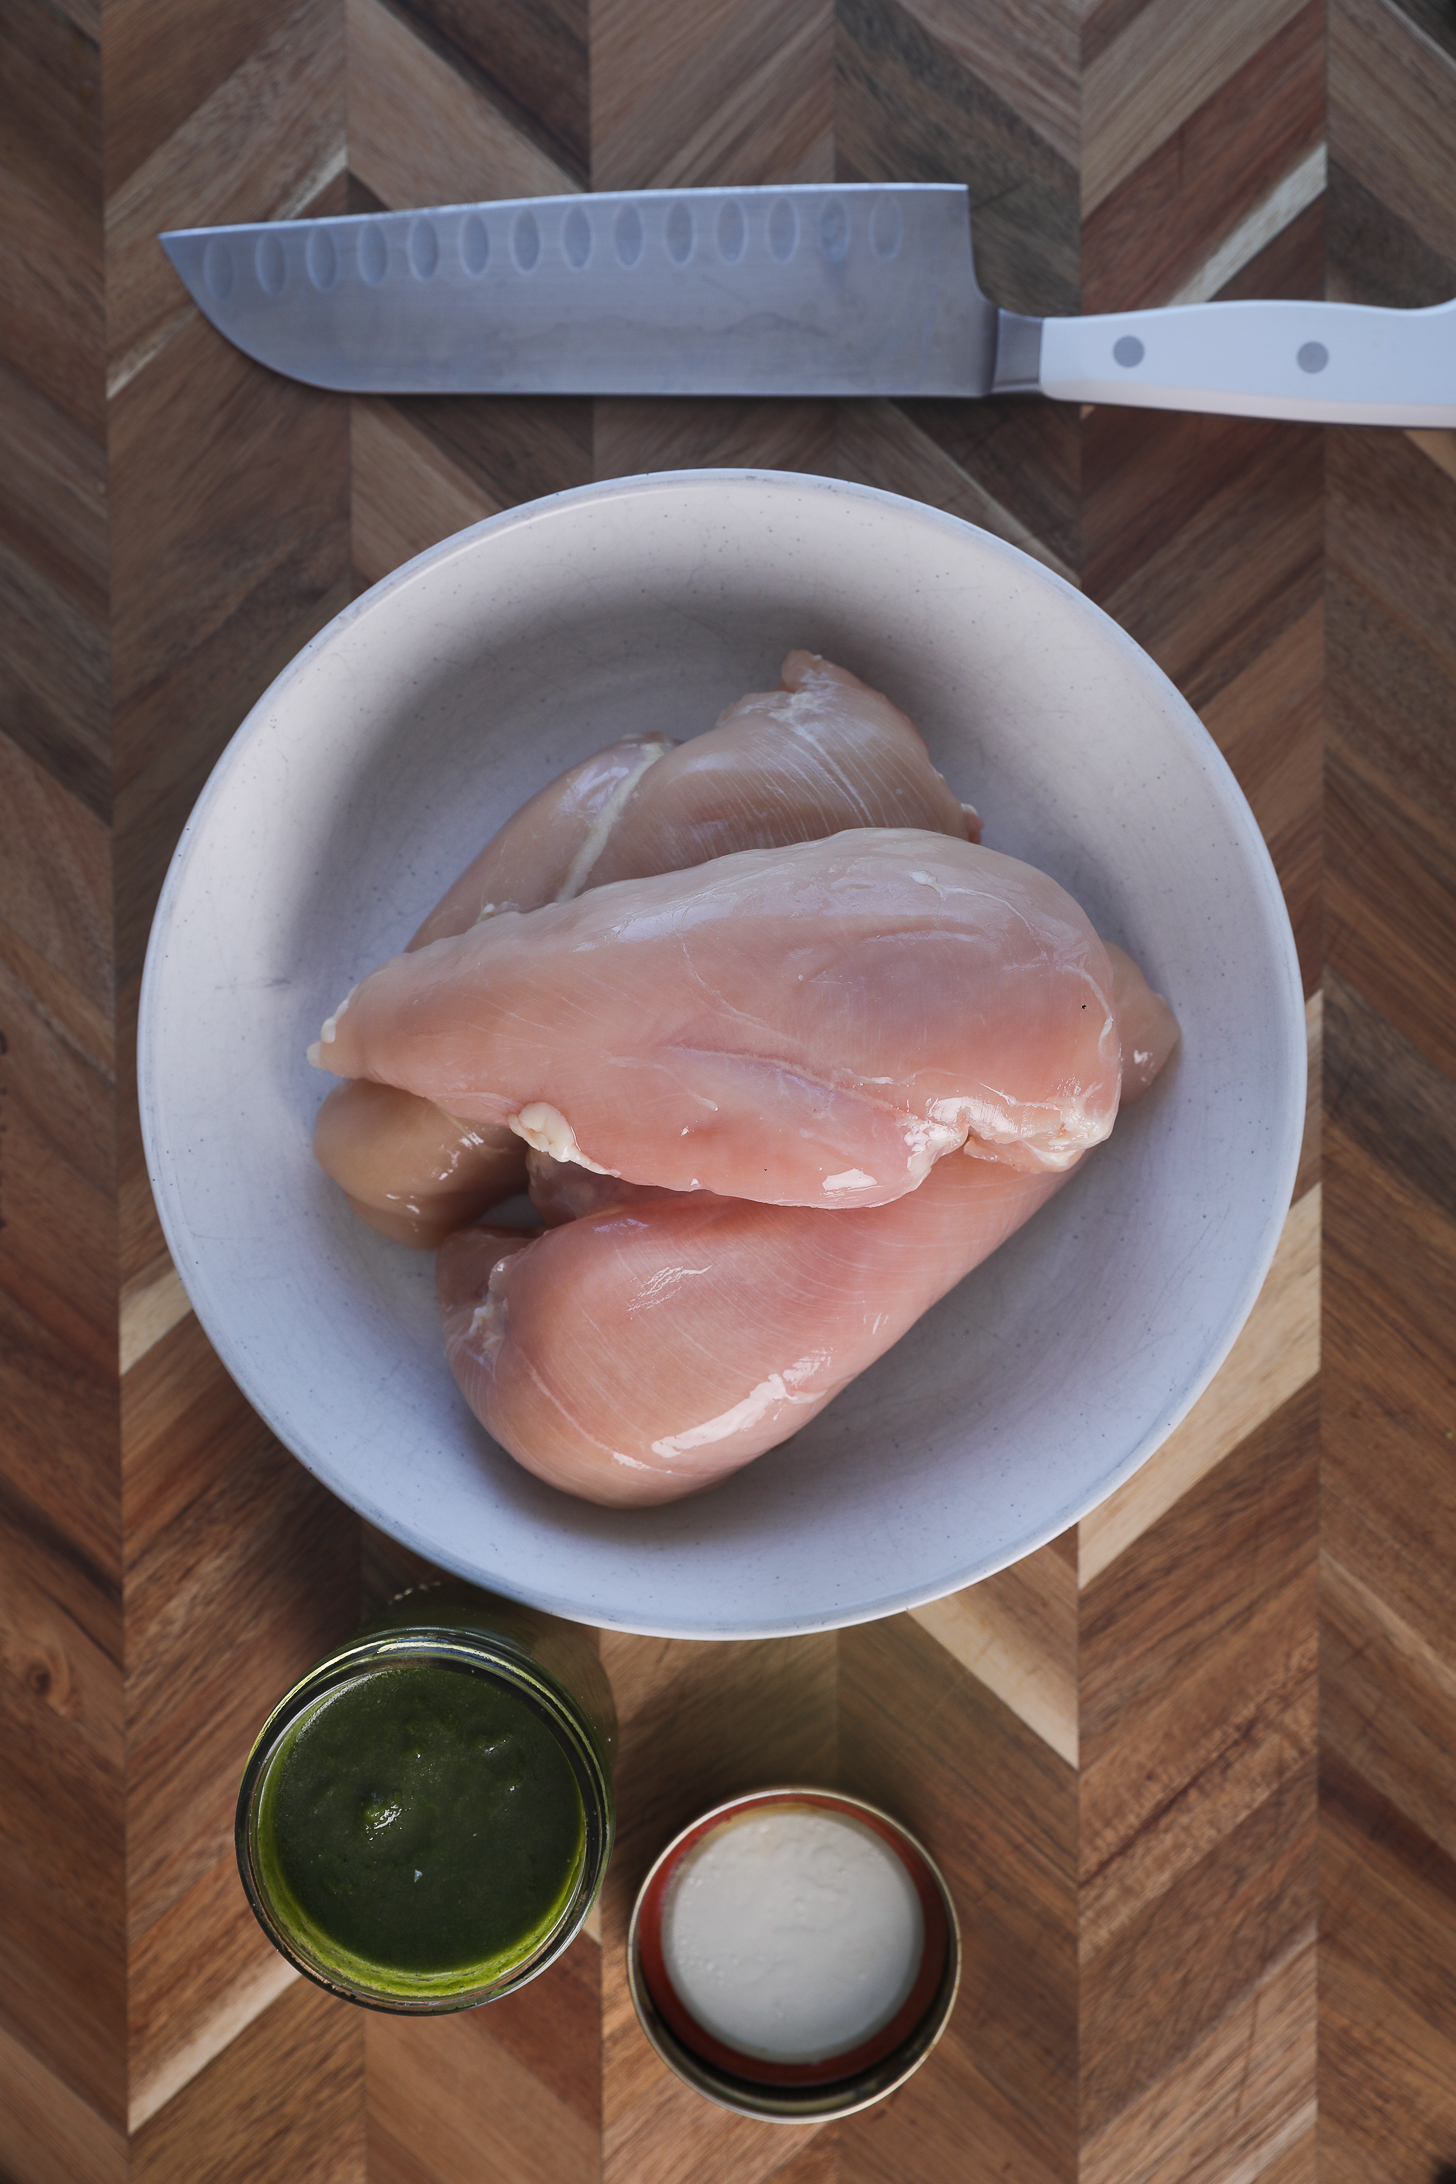 A bowl of chicken breast fillets placed on a wooden board next to a mason jar of green sauce.